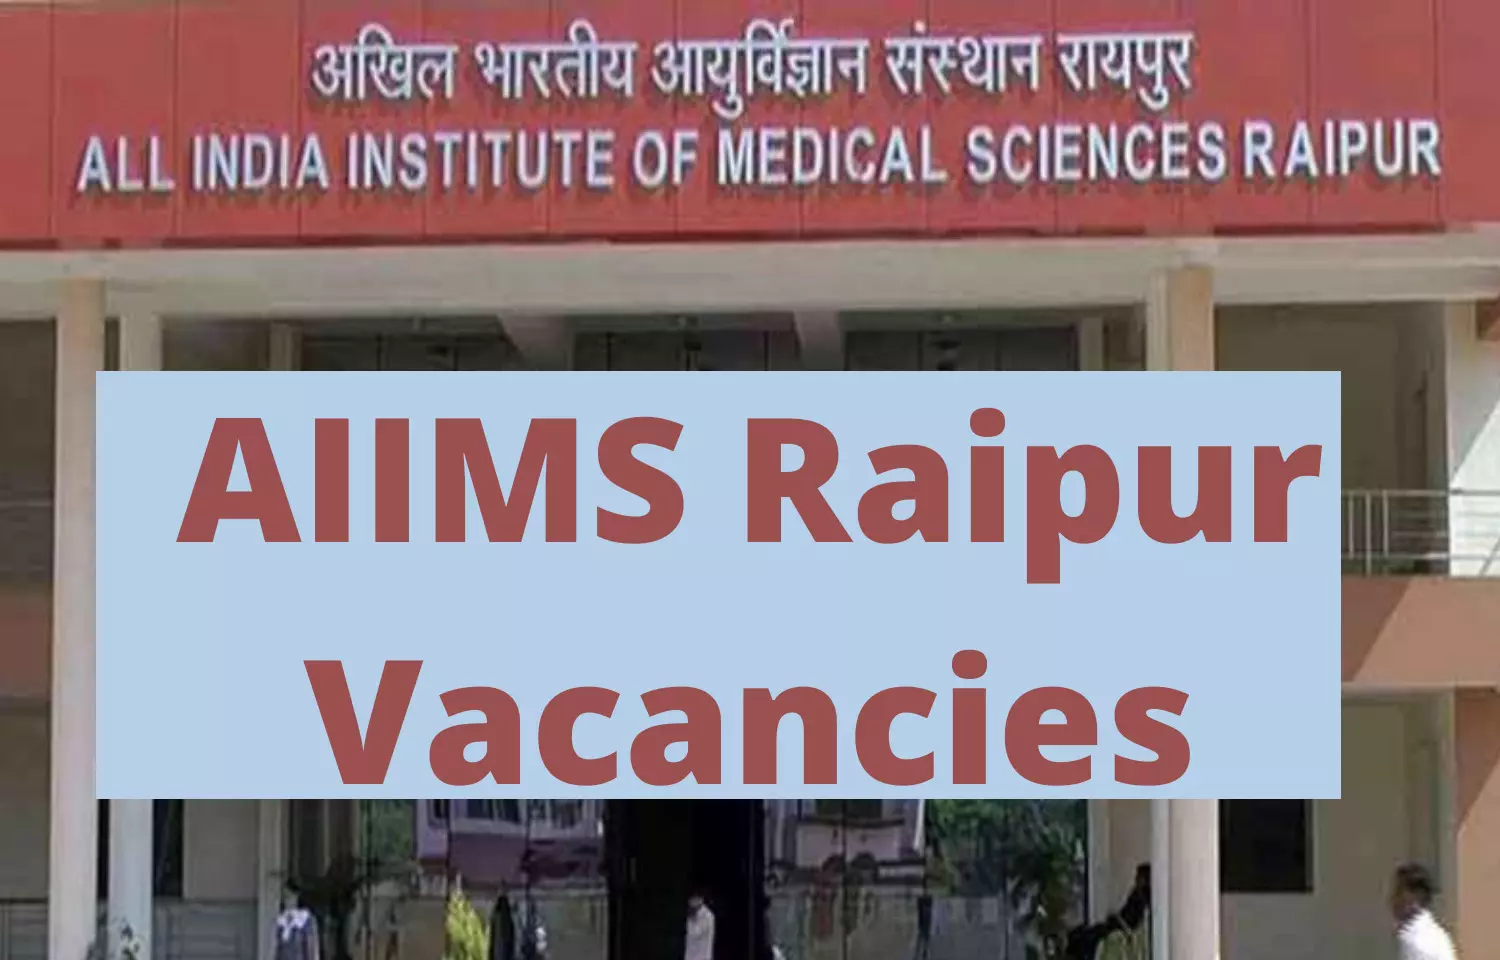 AIIMS Raipur Announces 136 Vacancies For Senior Resident Post In Various Departments, Apply Now